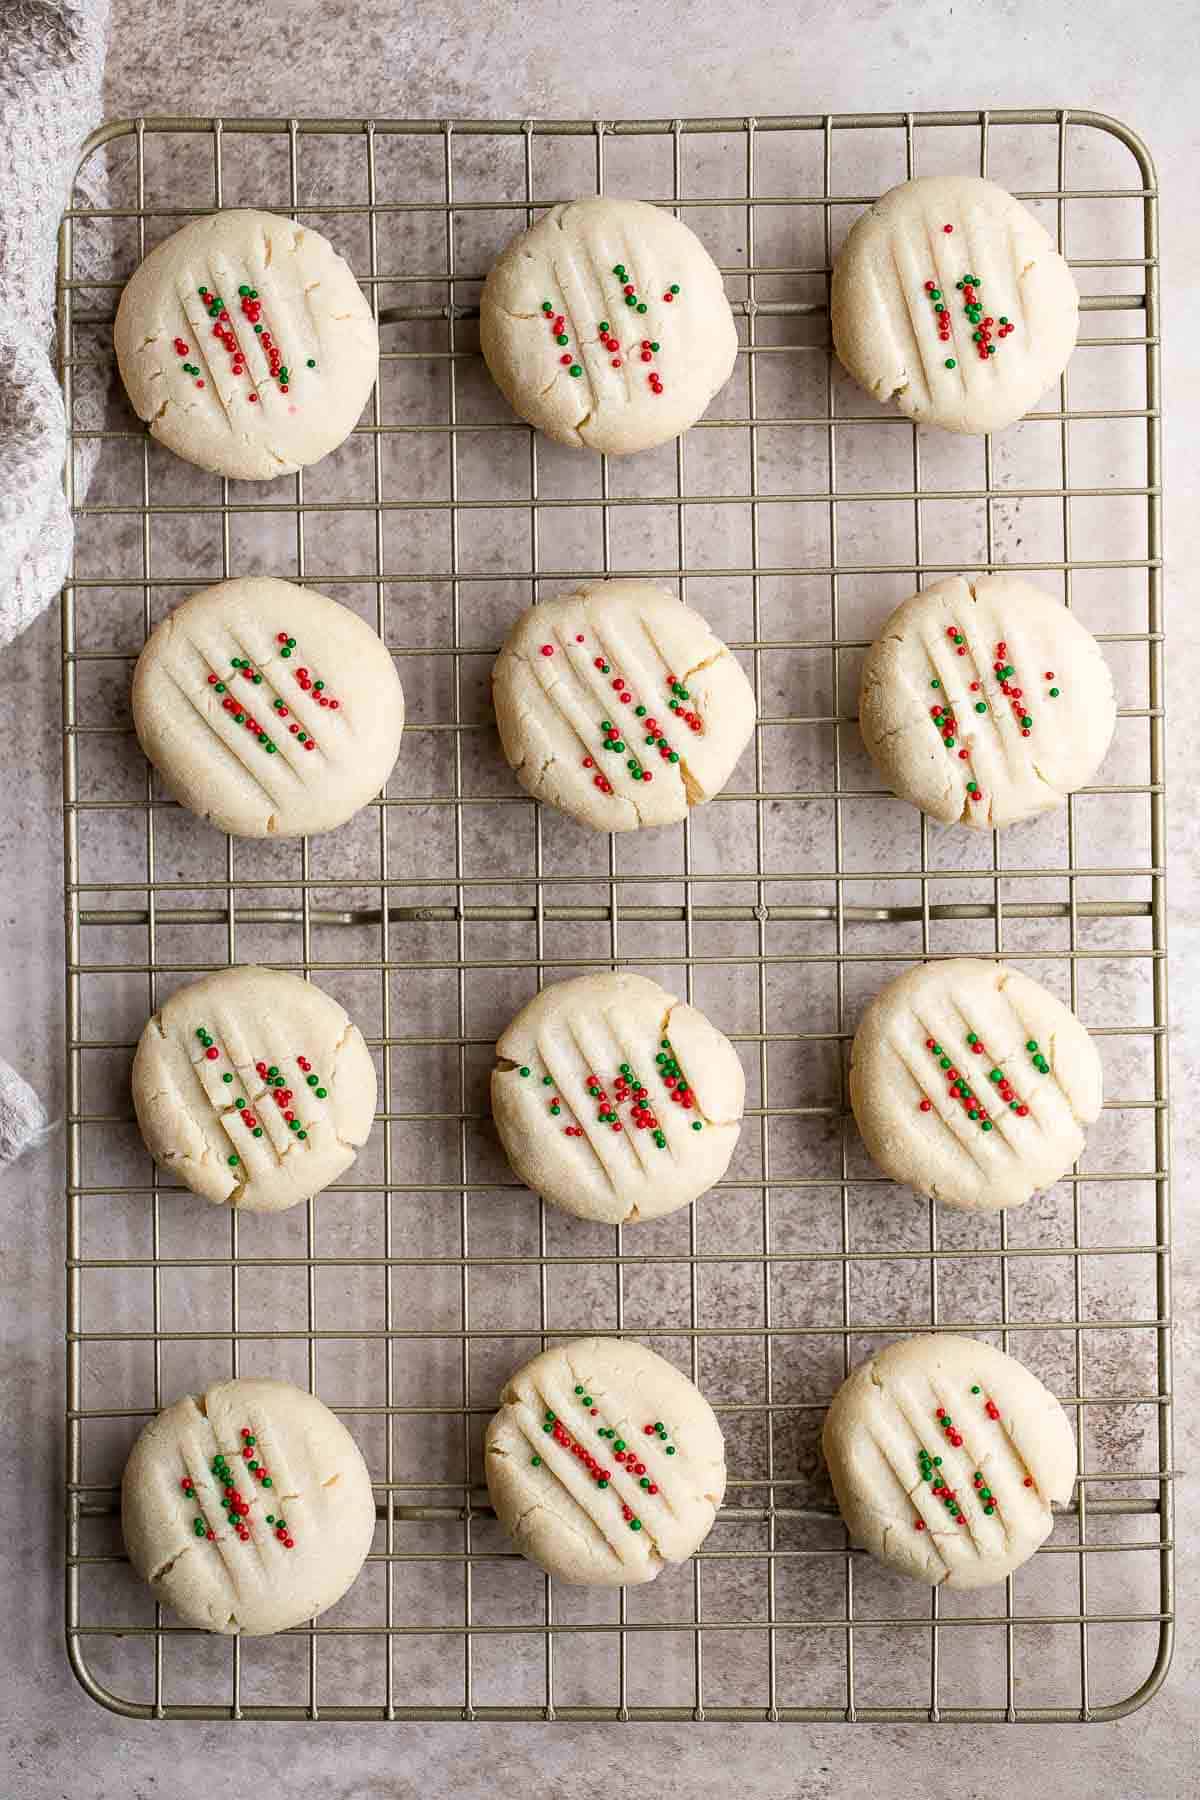 Whipped Shortbread Cookies are sweet and buttery cookies that melt in your mouth. These light tea time treats have crisp edges and a crumbly center. | aheadofthyme.com